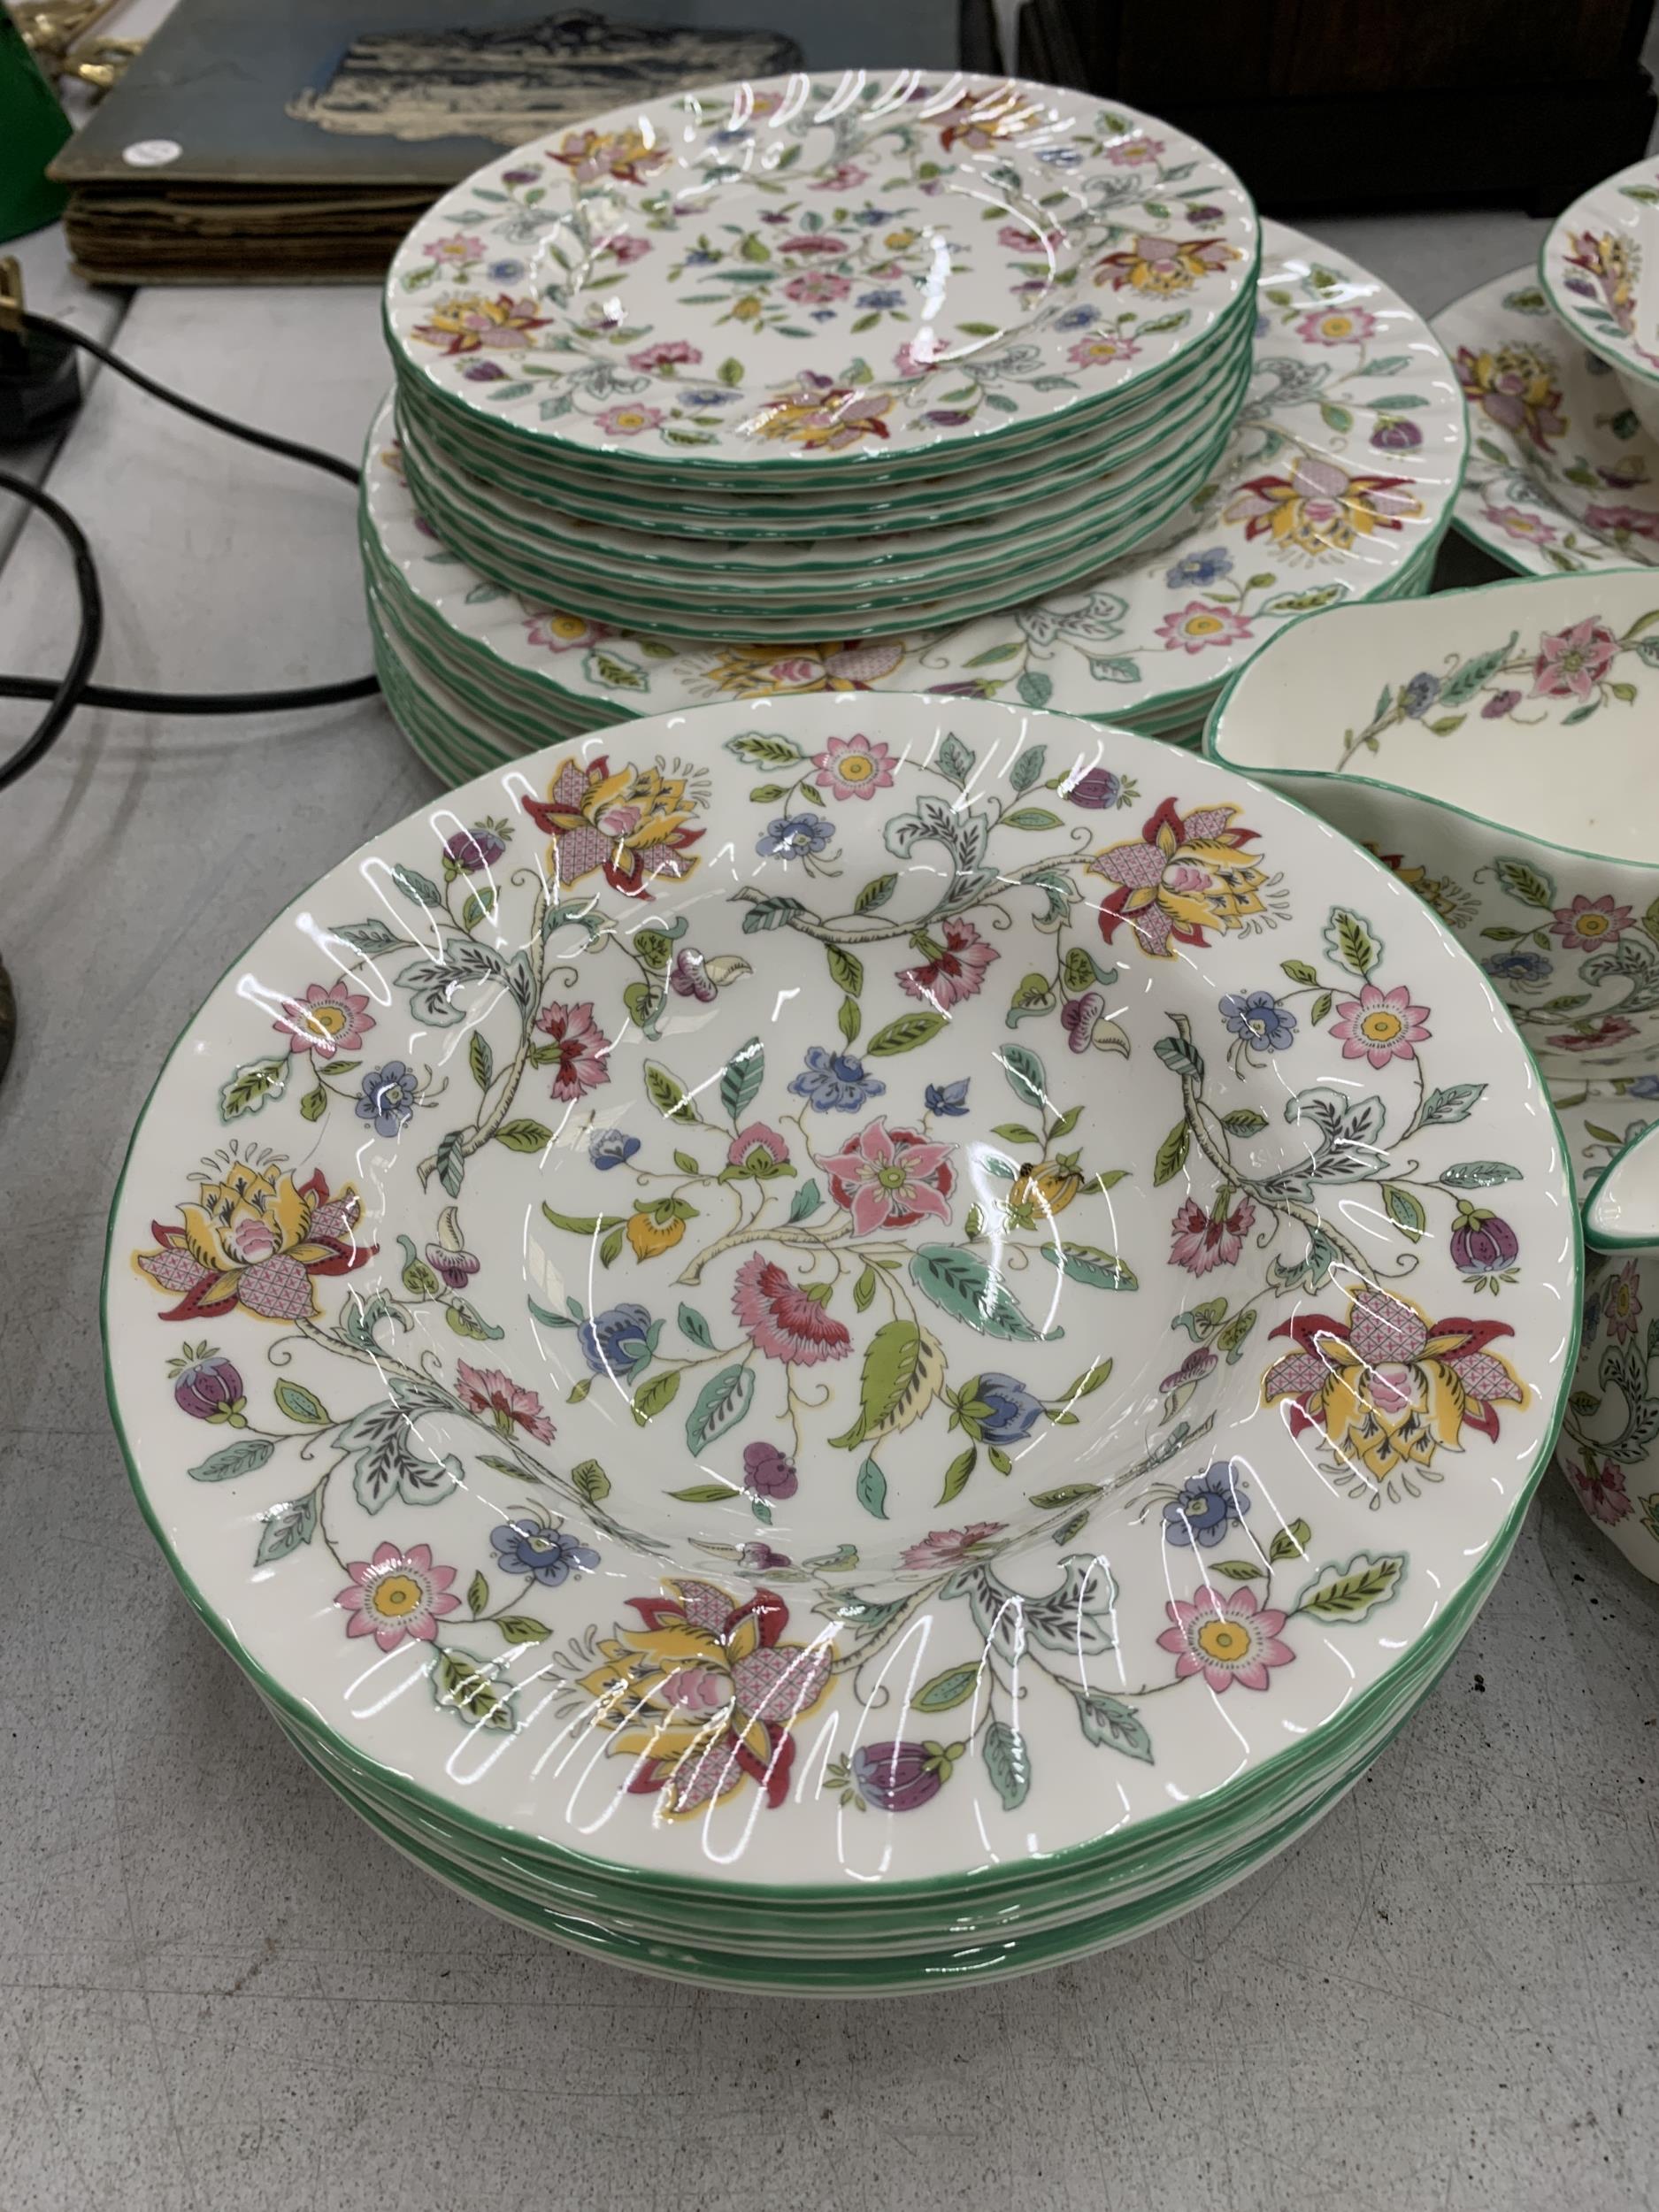 A LARGE QUANTITY OF MINTON HADDON HALL TO INCLUDE SERVING BOWLS, PLATTER, DINNER PLATES, SOUP BOWLS, - Image 2 of 7